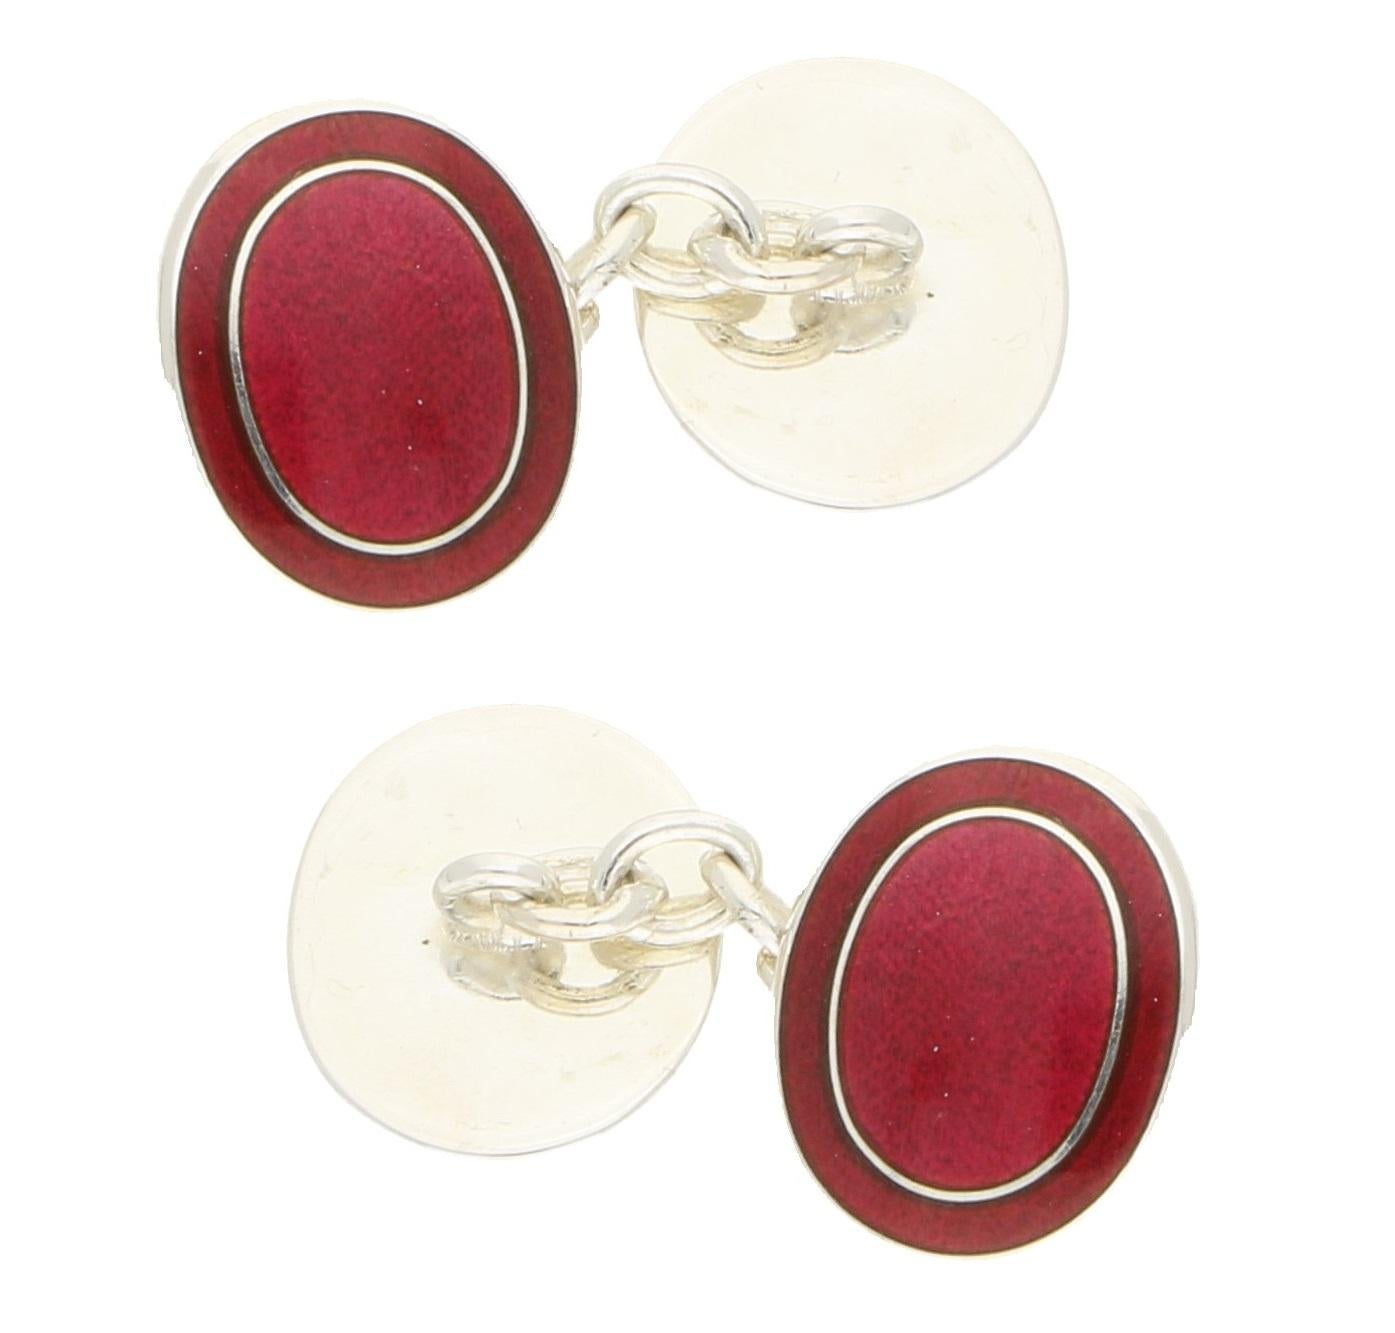 A pair of enamel oval cufflinks in sterling silver. 
Each cufflink is designed as two oval sterling silver plaques decorated with red enamel within a frame of darker red enamel, the plaques connected with a belcher link chain. Dimensions: 1.7x1.4cm.